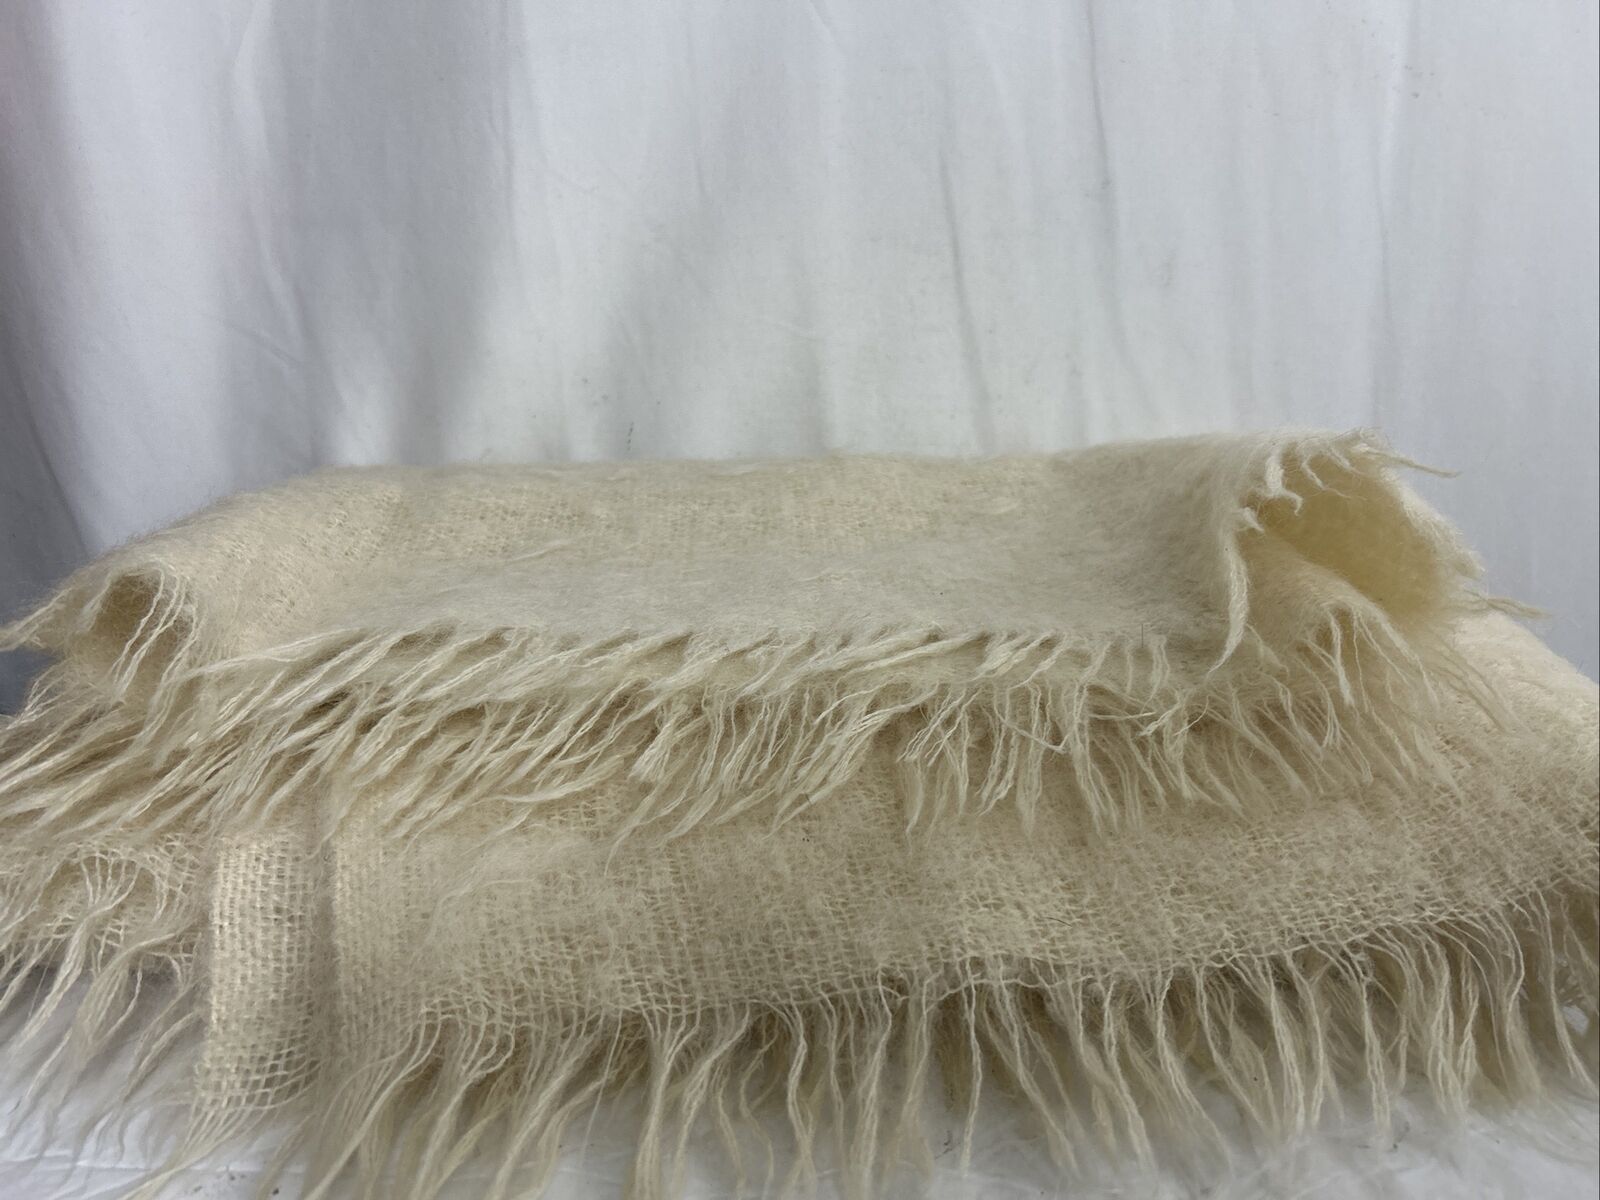 Vintage Mohair Blanket Toison D’or 100% mohair Cream made in France 51”x71”